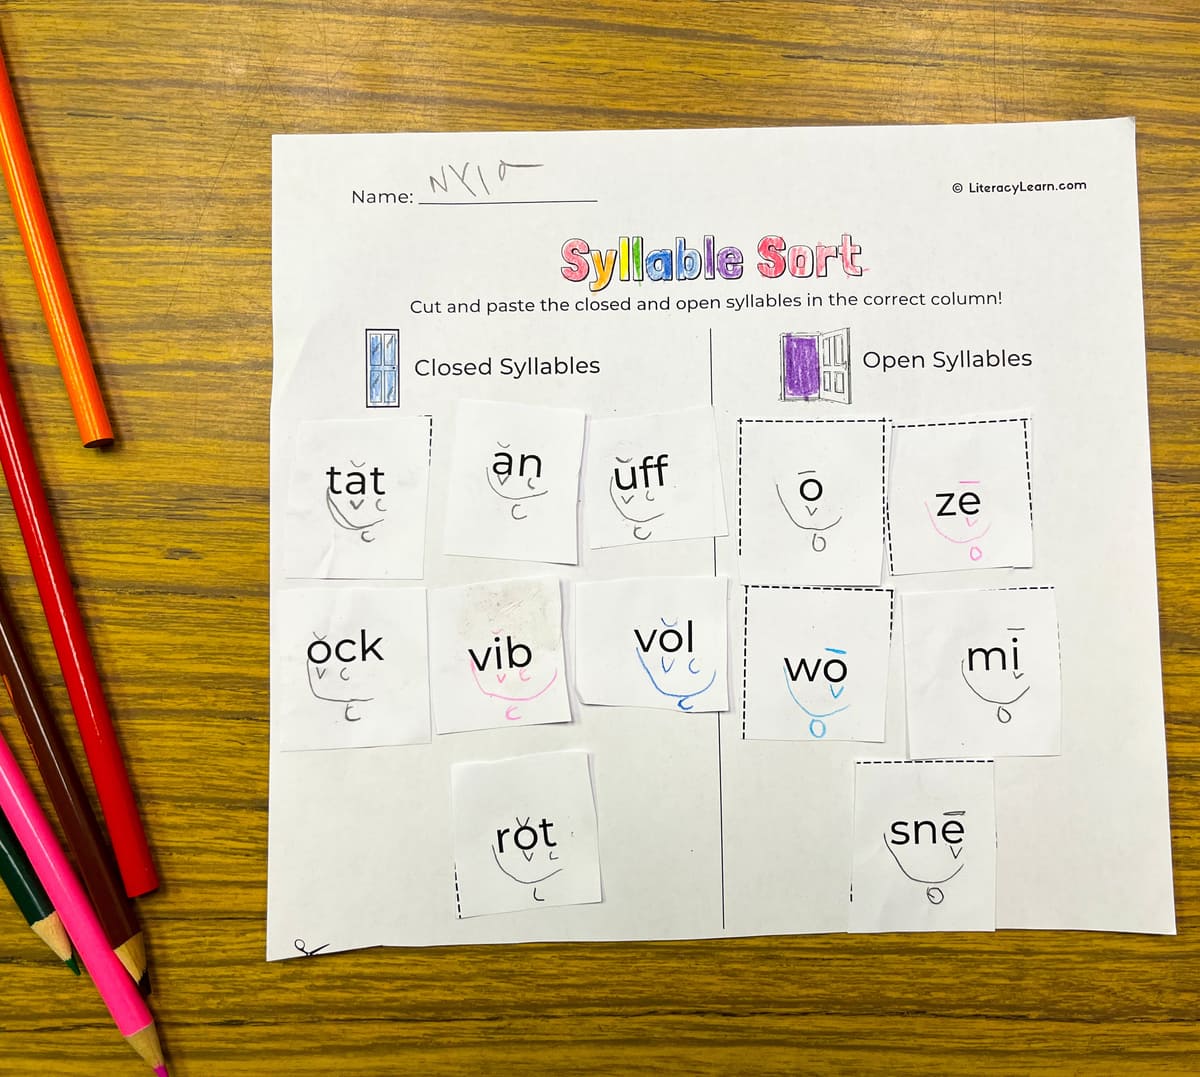 A finished syllable sort worksheet marked up.